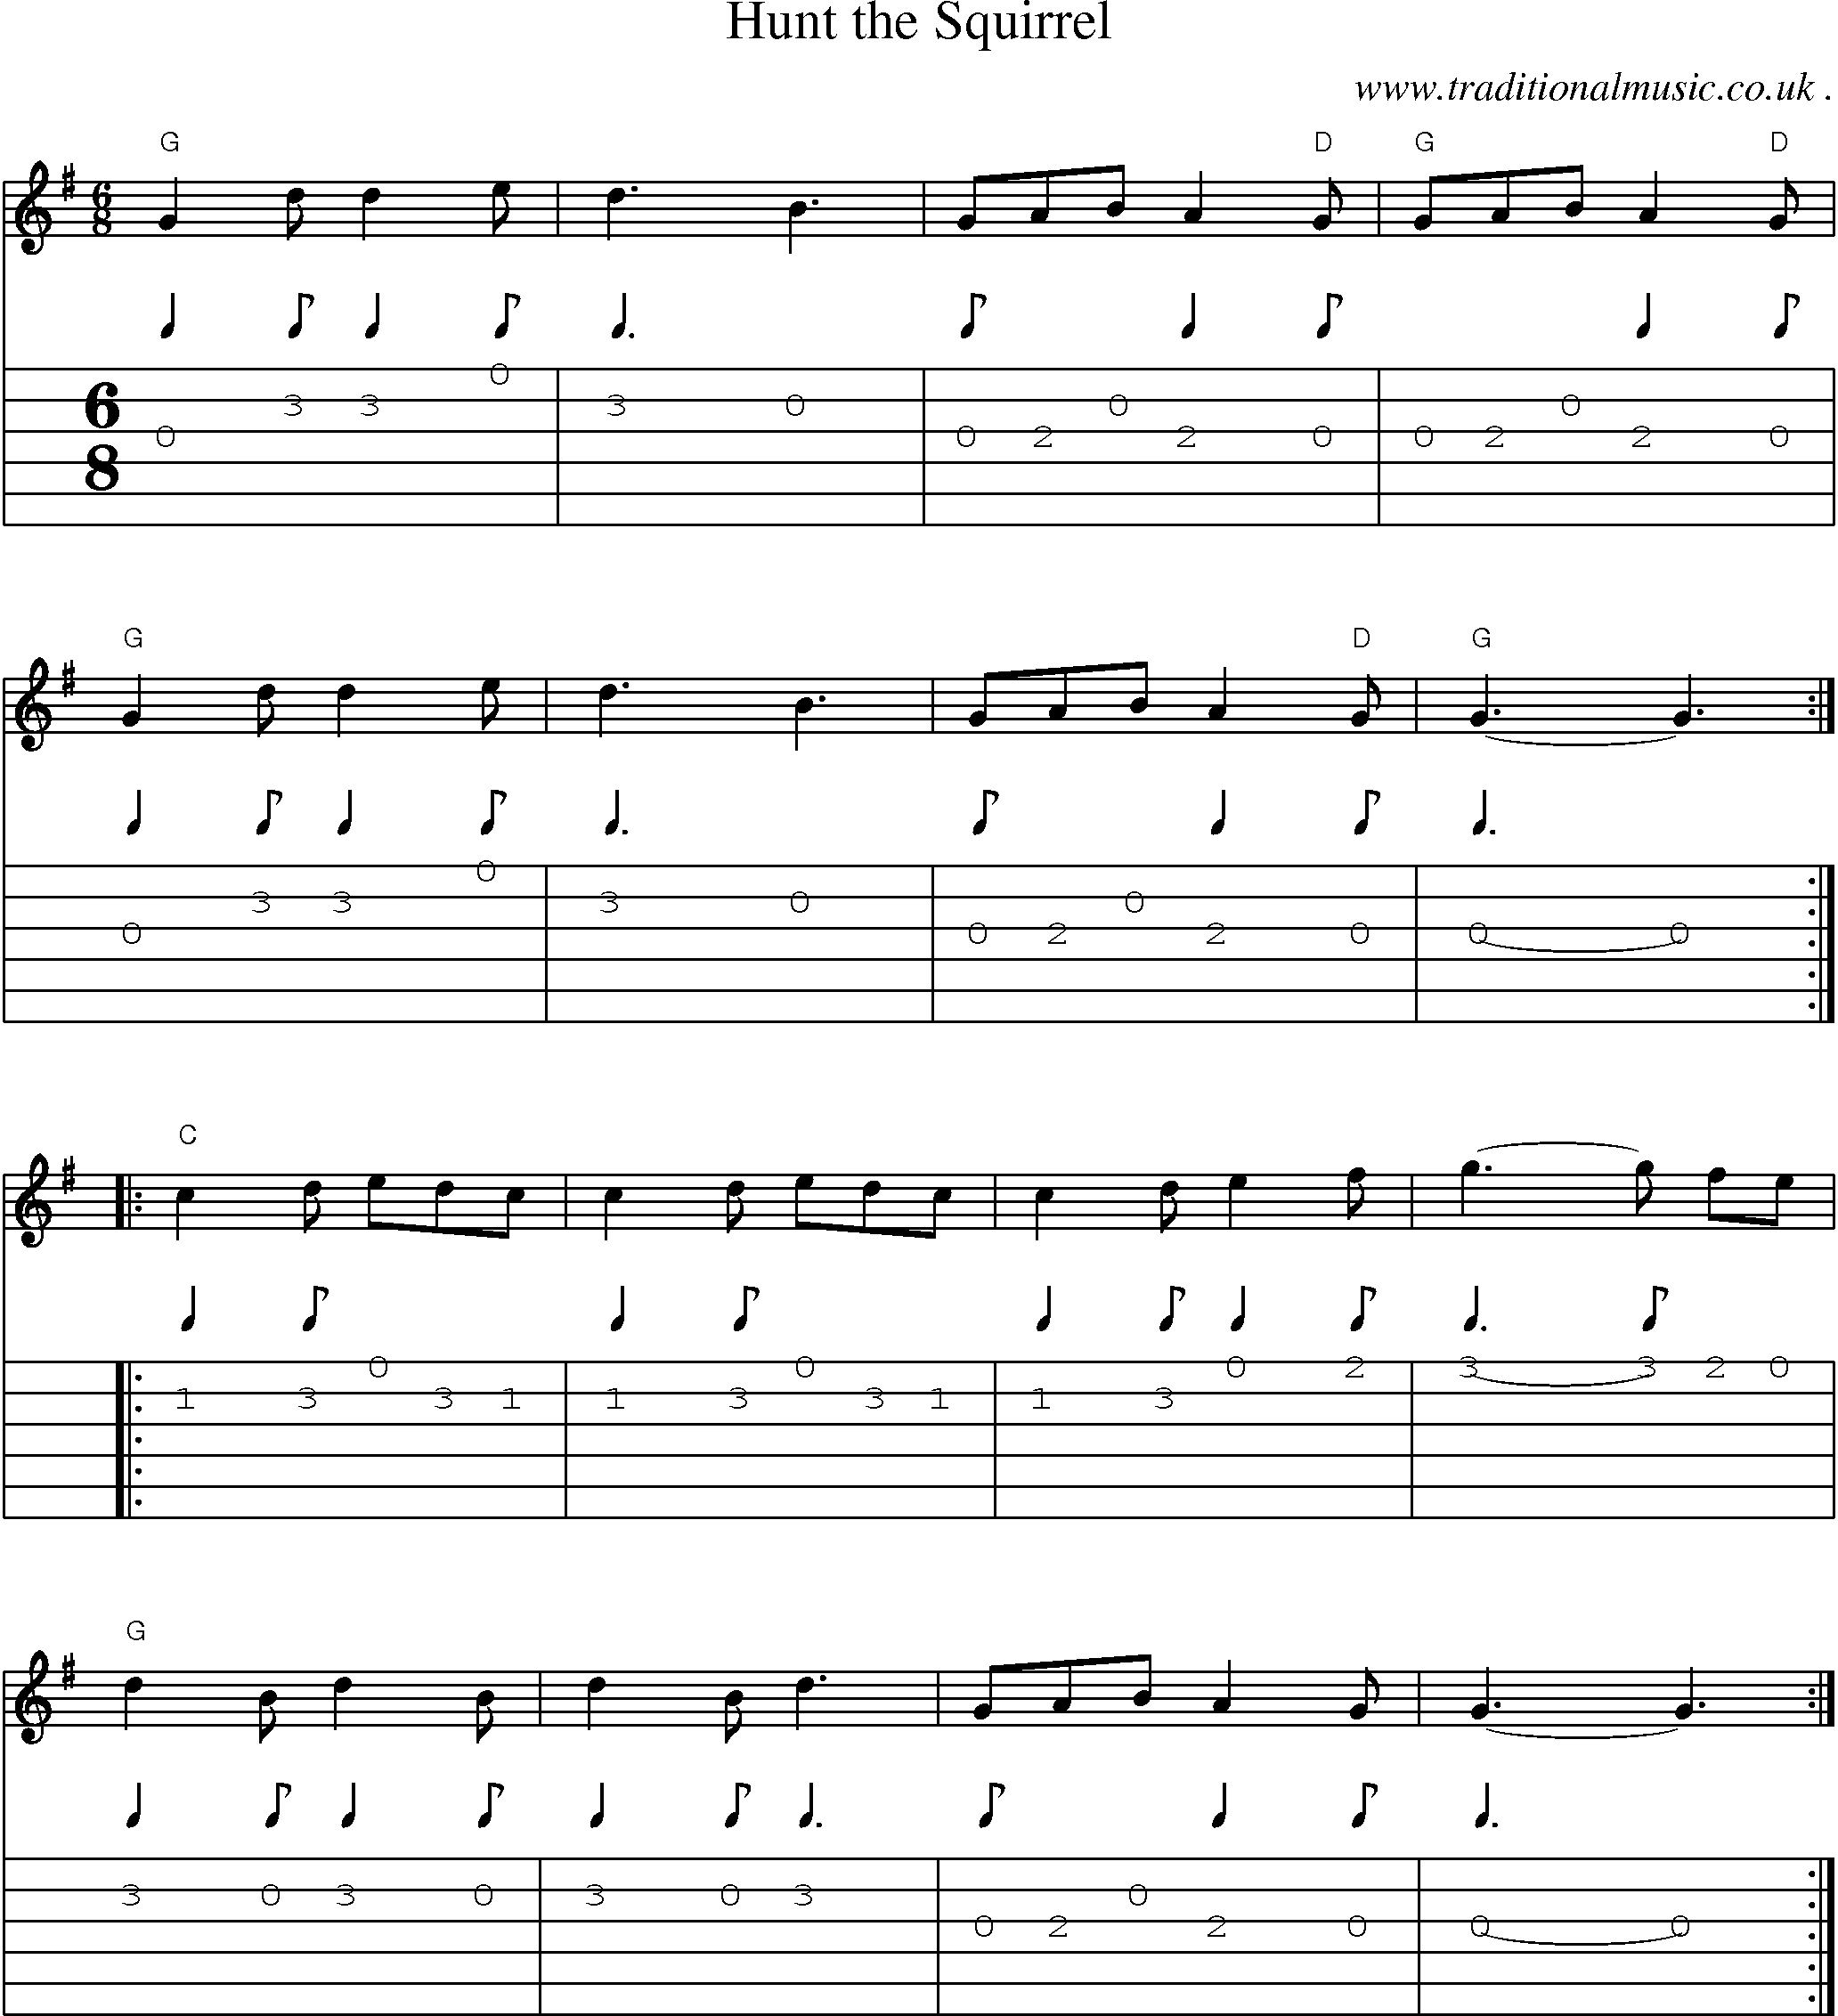 Music Score and Guitar Tabs for Hunt the Squirrel